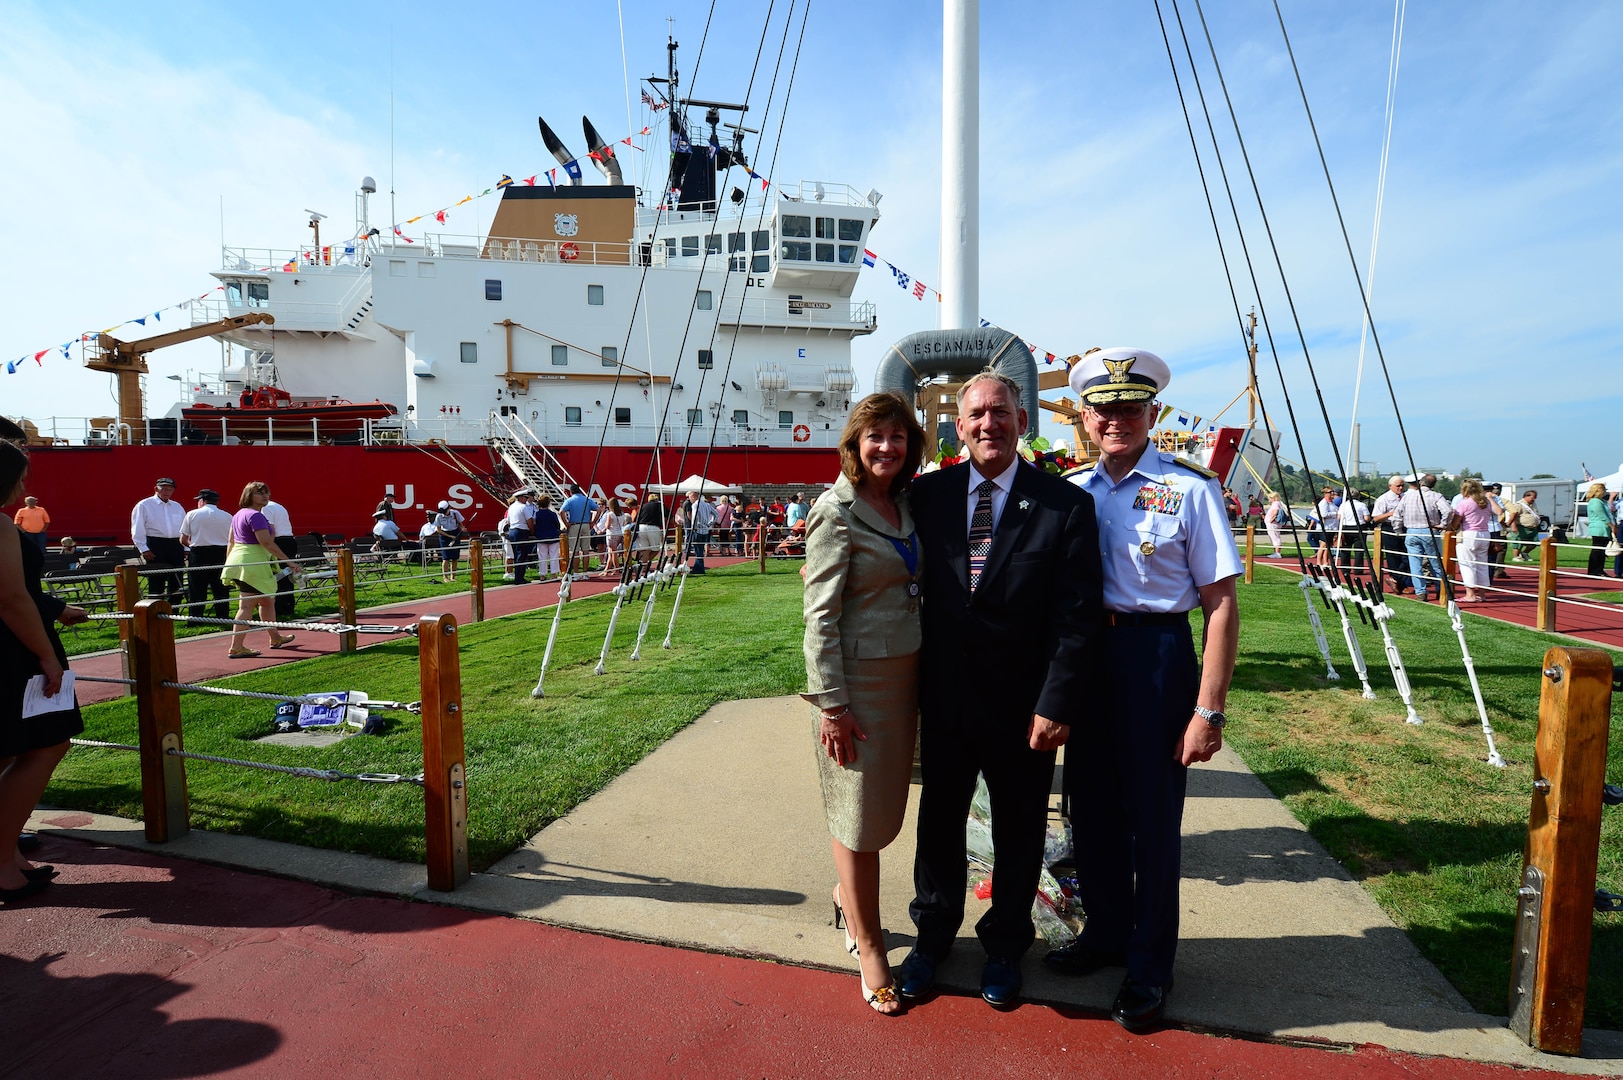 Cmdr. Mike Smith, center, at the 2013 Coast Guard Festival in Grand Haven, MI., Thurs. Aug. 2, 2013.